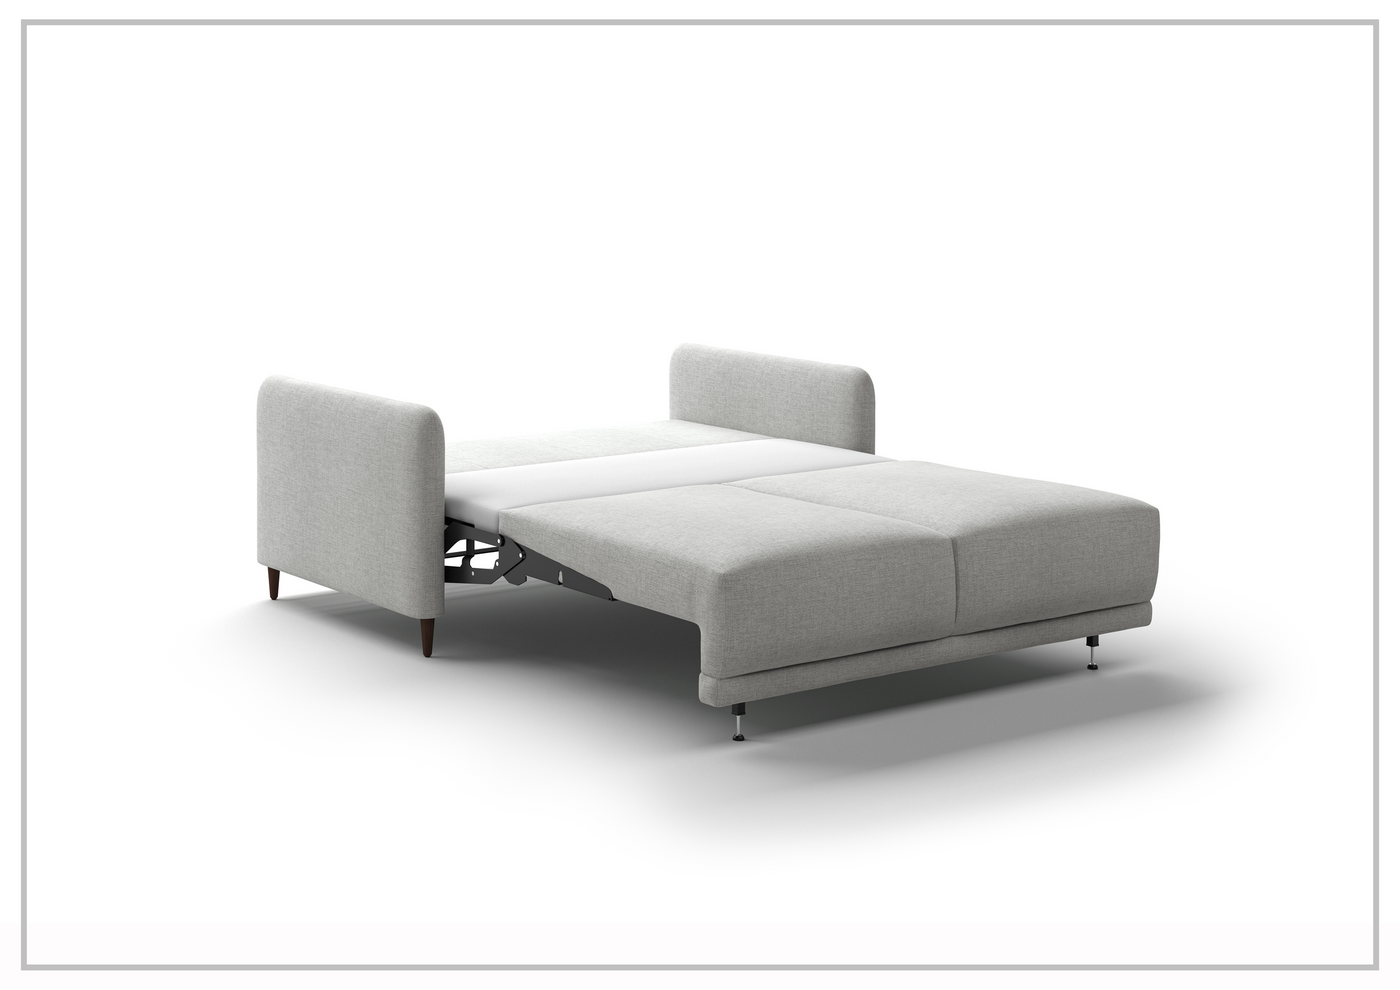 Haven Gray Fabric Sleeper with Hybrid Deluxe Function